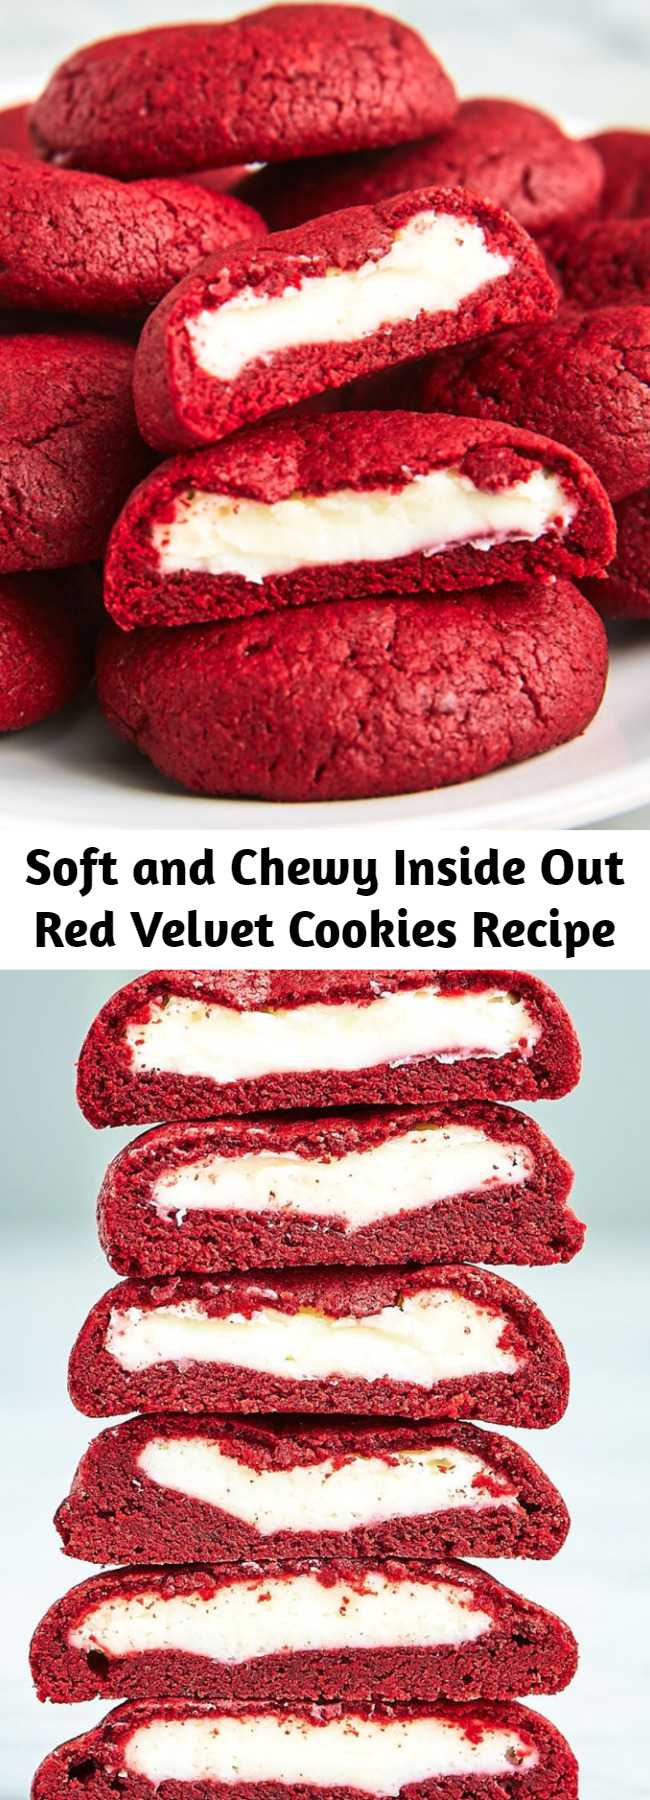 Soft and Chewy Inside Out Red Velvet Cookies Recipe - Get your Red Velvet Cake (frosting and all) in cookie form! These irresistibly soft and chewy red velvet cookies stuffed with real deal cream cheese frosting, are pretty amazing!